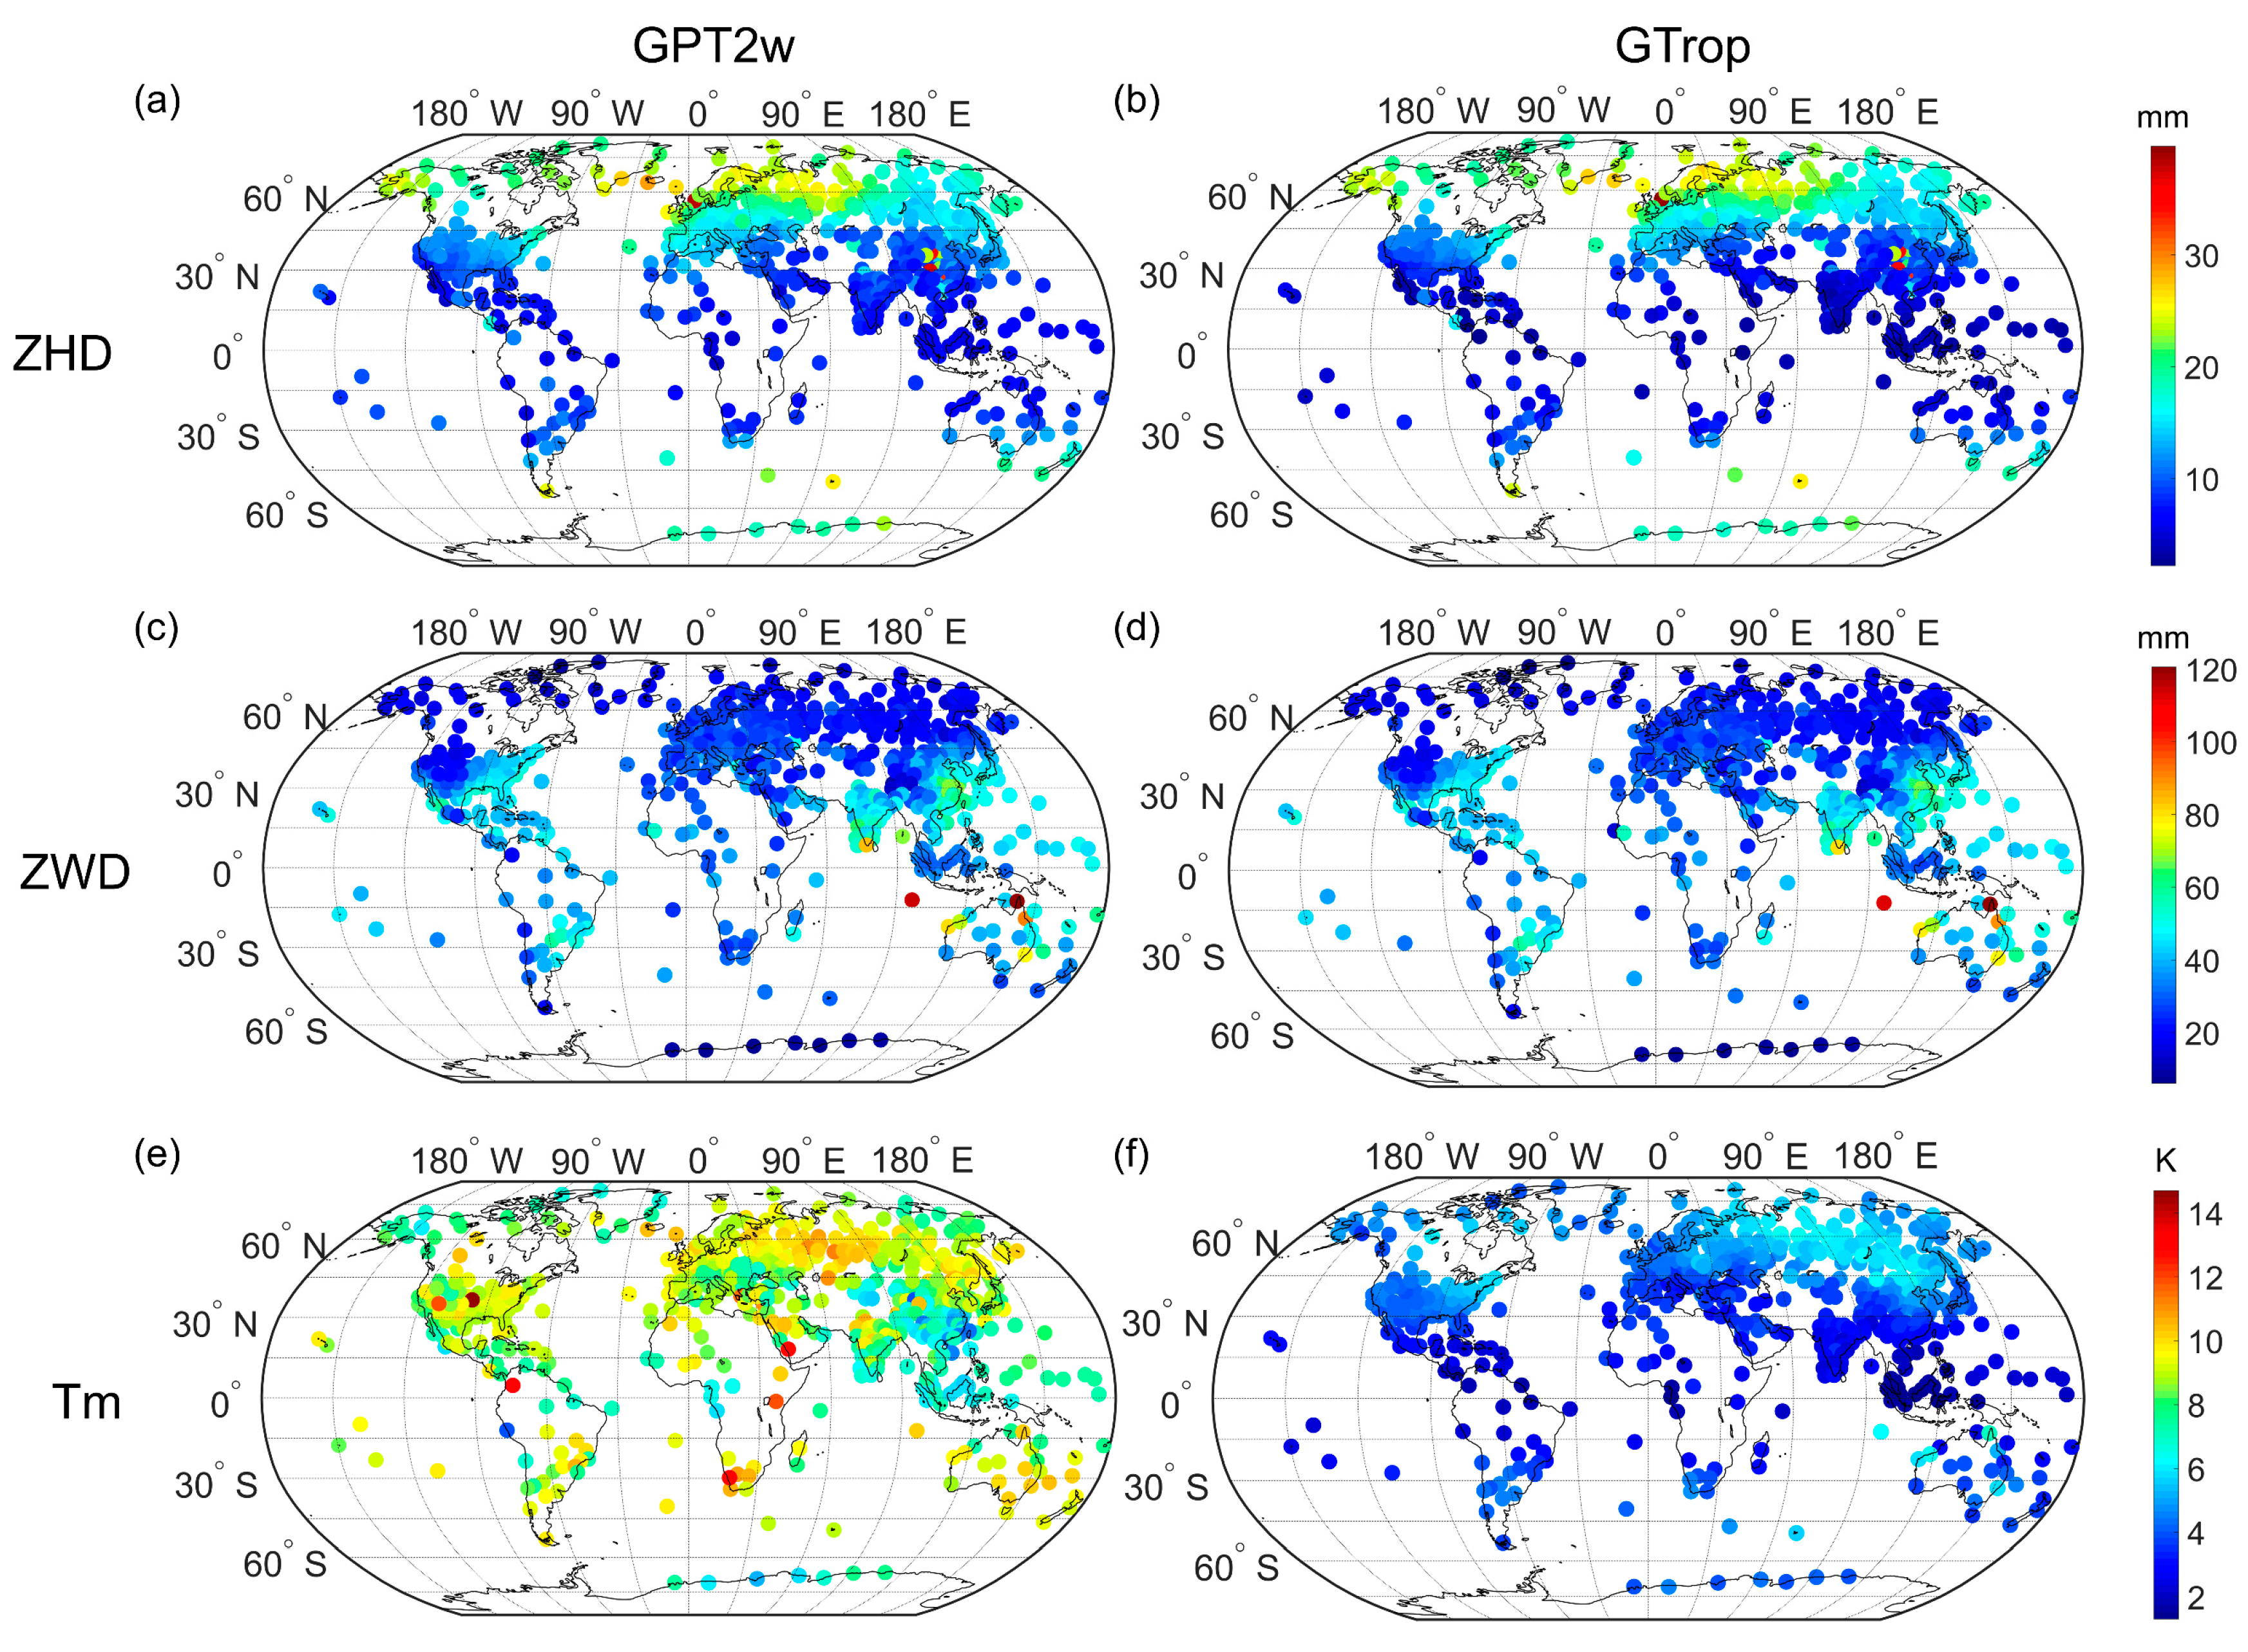 Global RMS of GTrop and GPT2w validated by radiosonde data